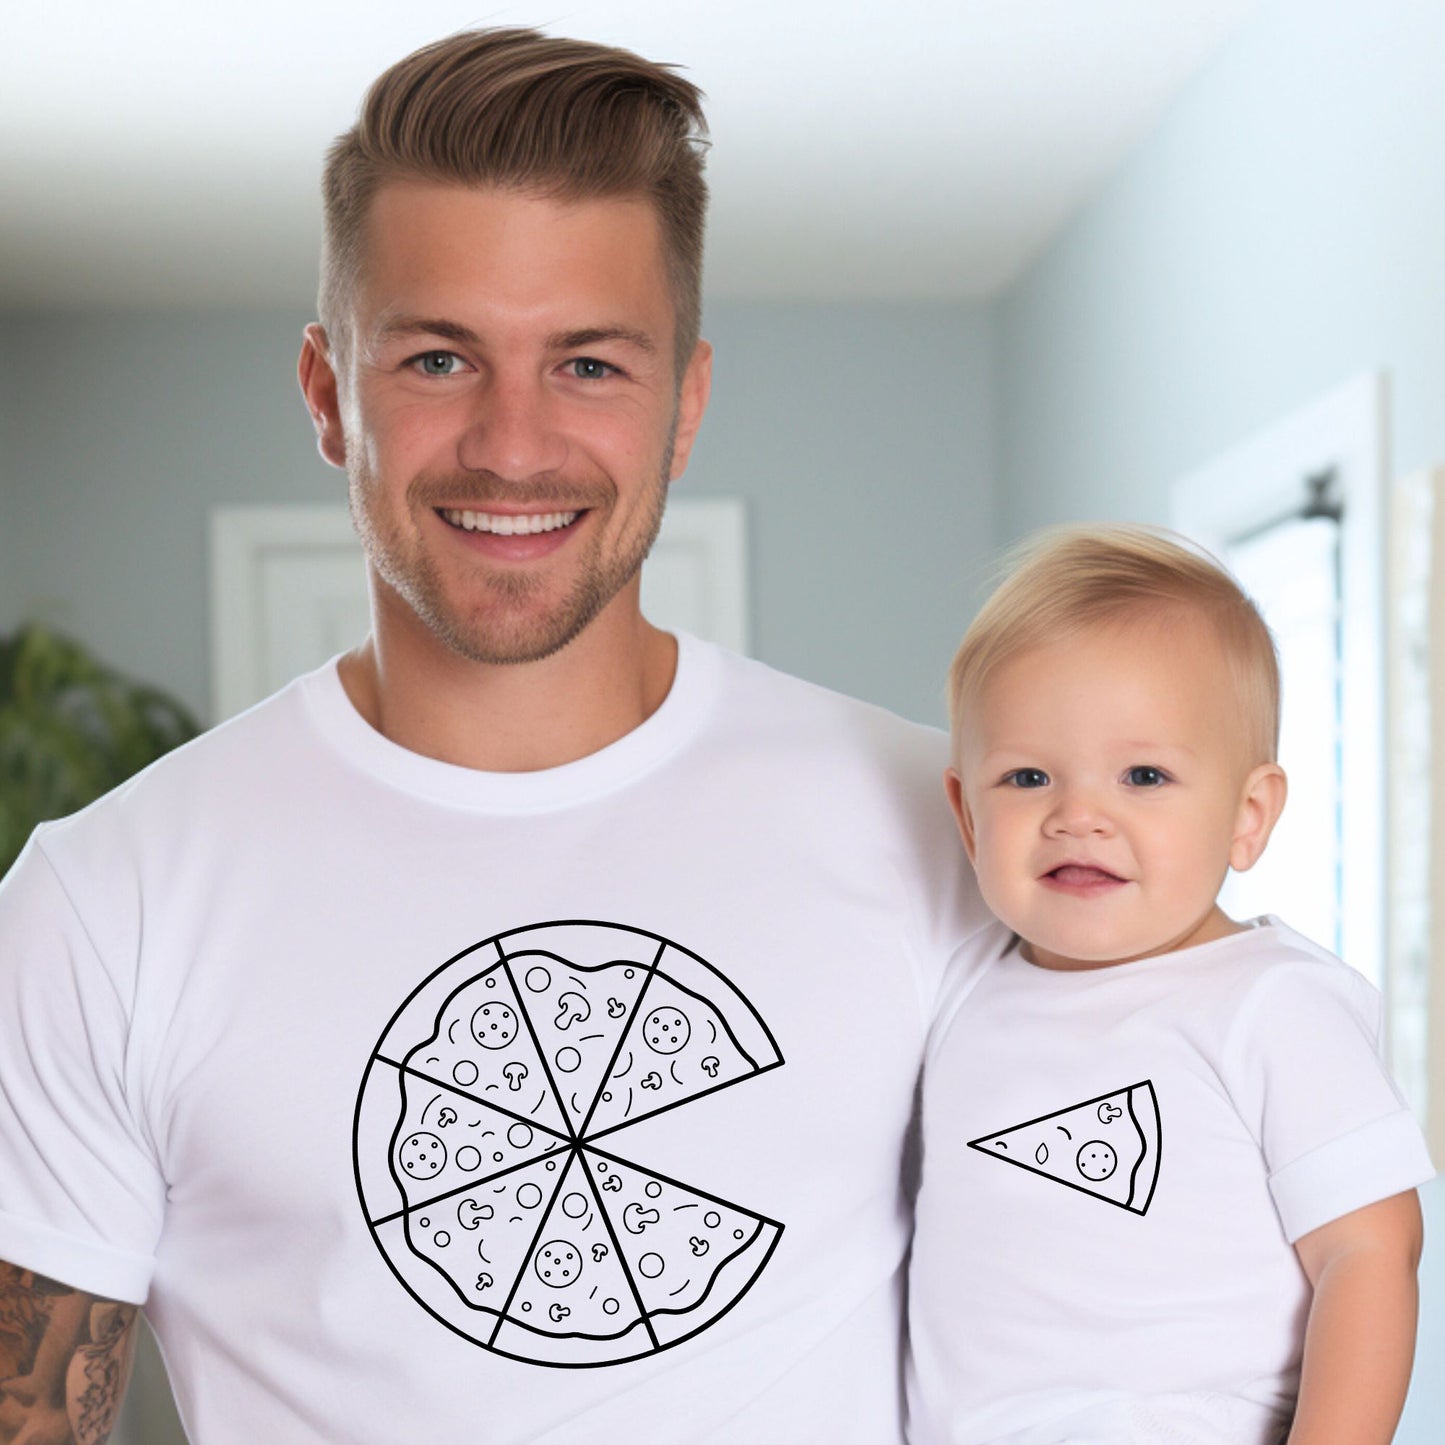 Pizza Perfection - Dad and Baby Matching Outfits